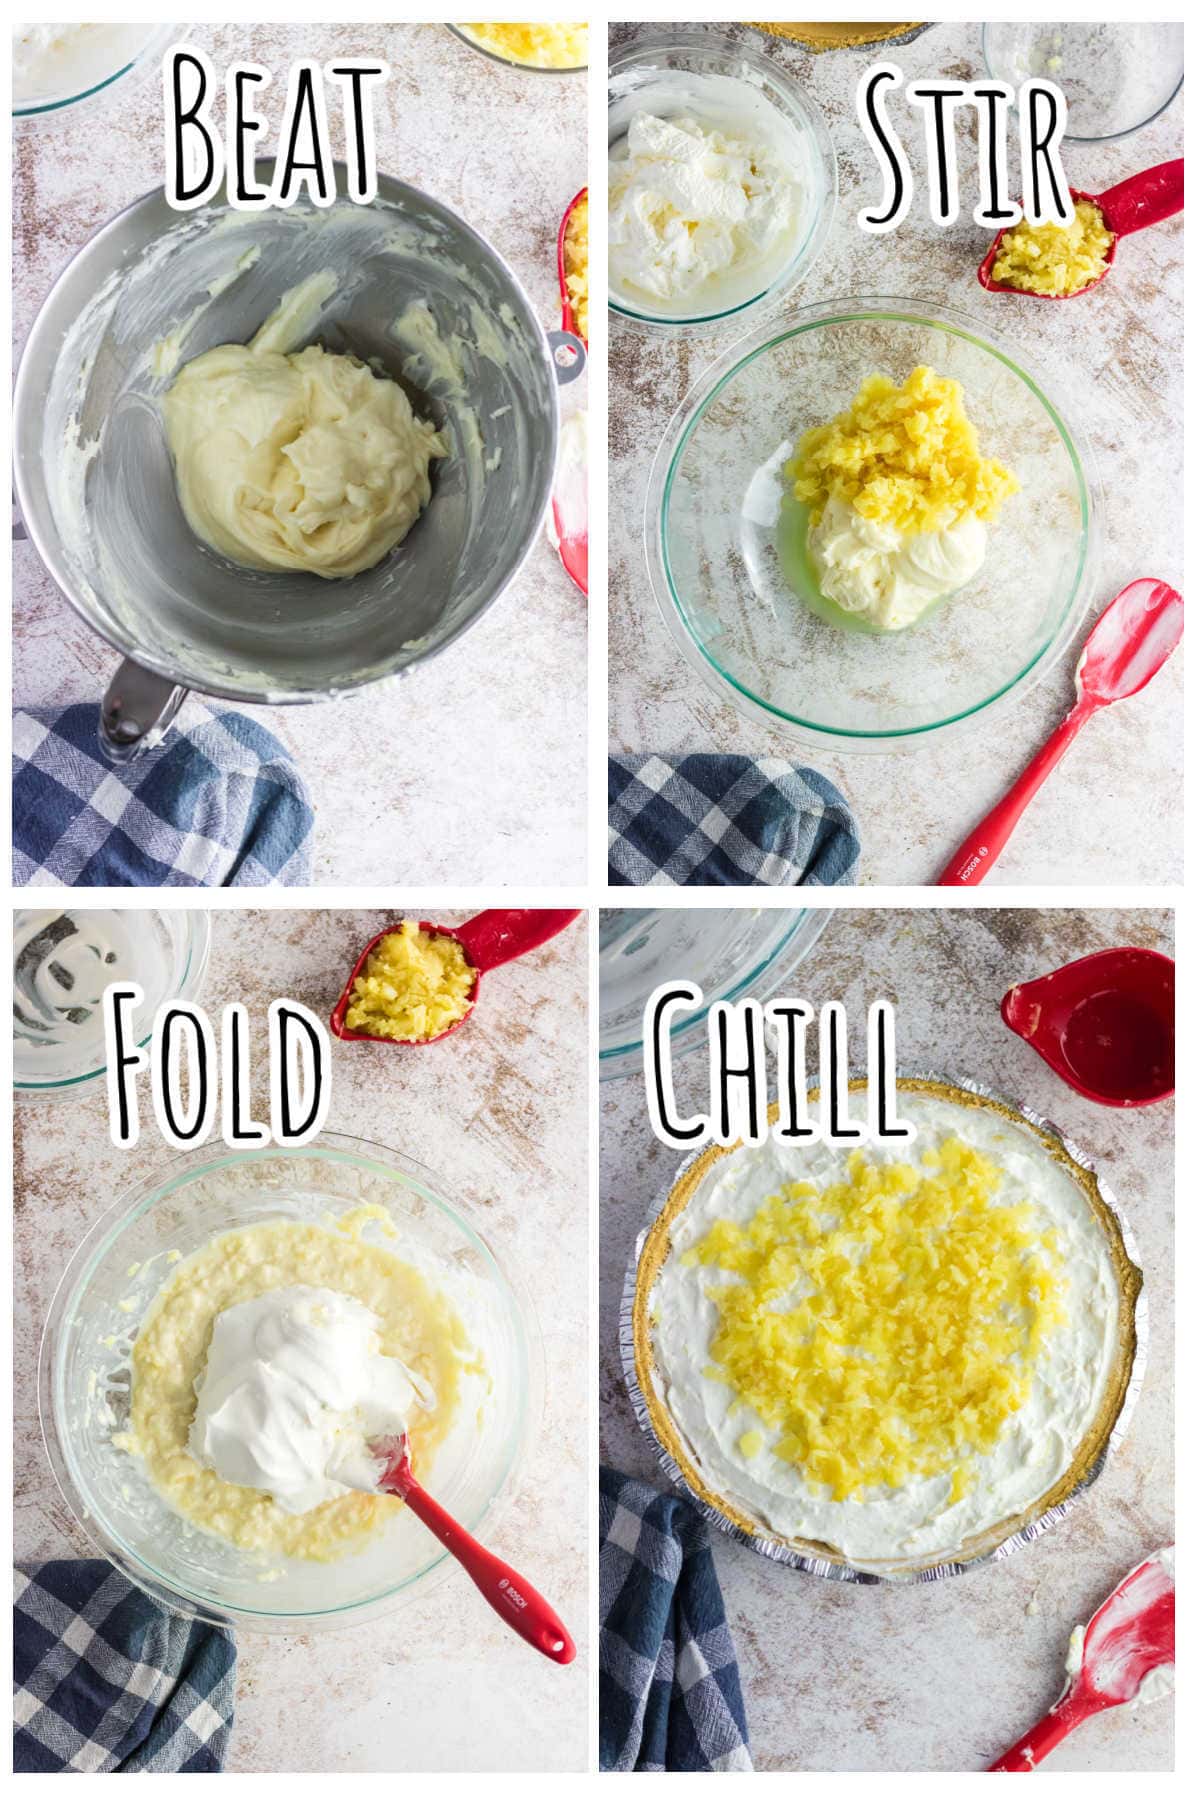 Step by step images showing how to make the pie.